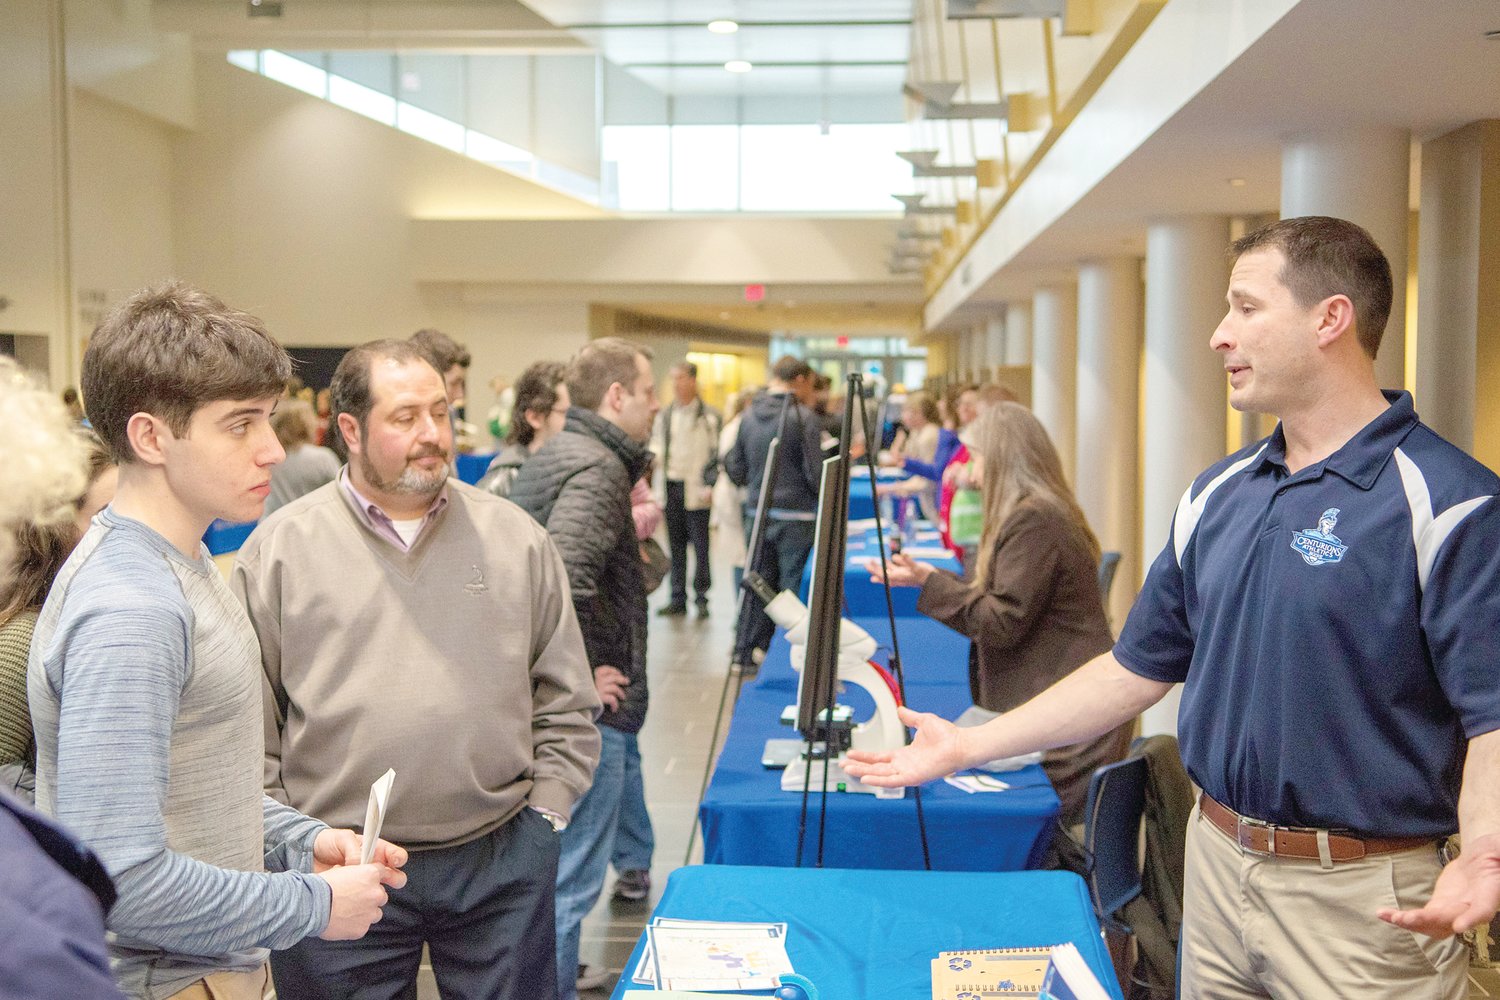 Bucks County Community College hosts a free open house Oct. 19, when attendees will get a chance to tour the campus and meet college officials, including Matt Cipriano, right, director of student life and athletic programs.